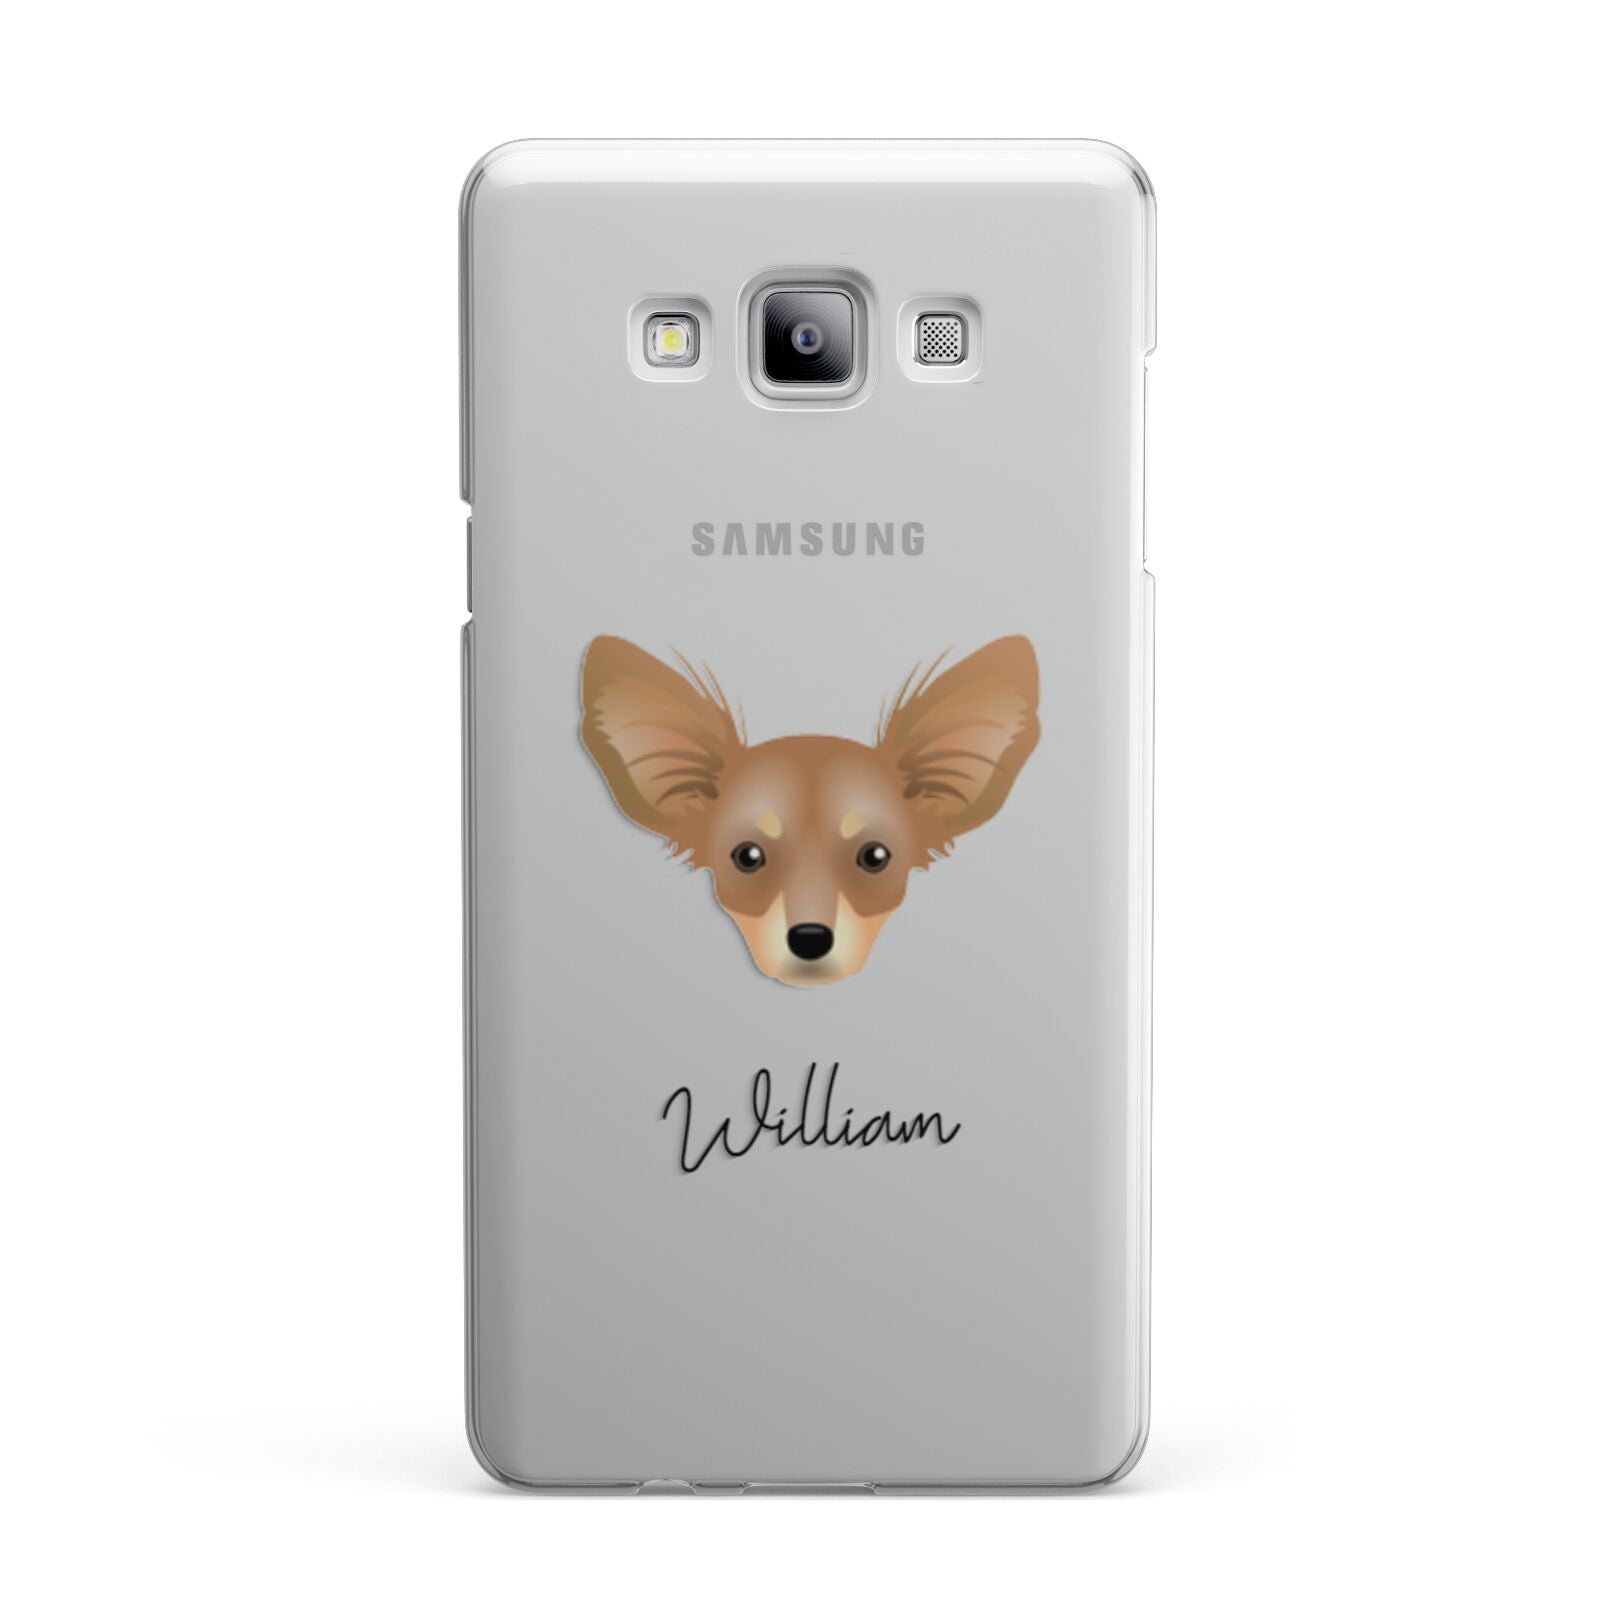 Russian Toy Personalised Samsung Galaxy A7 2015 Case